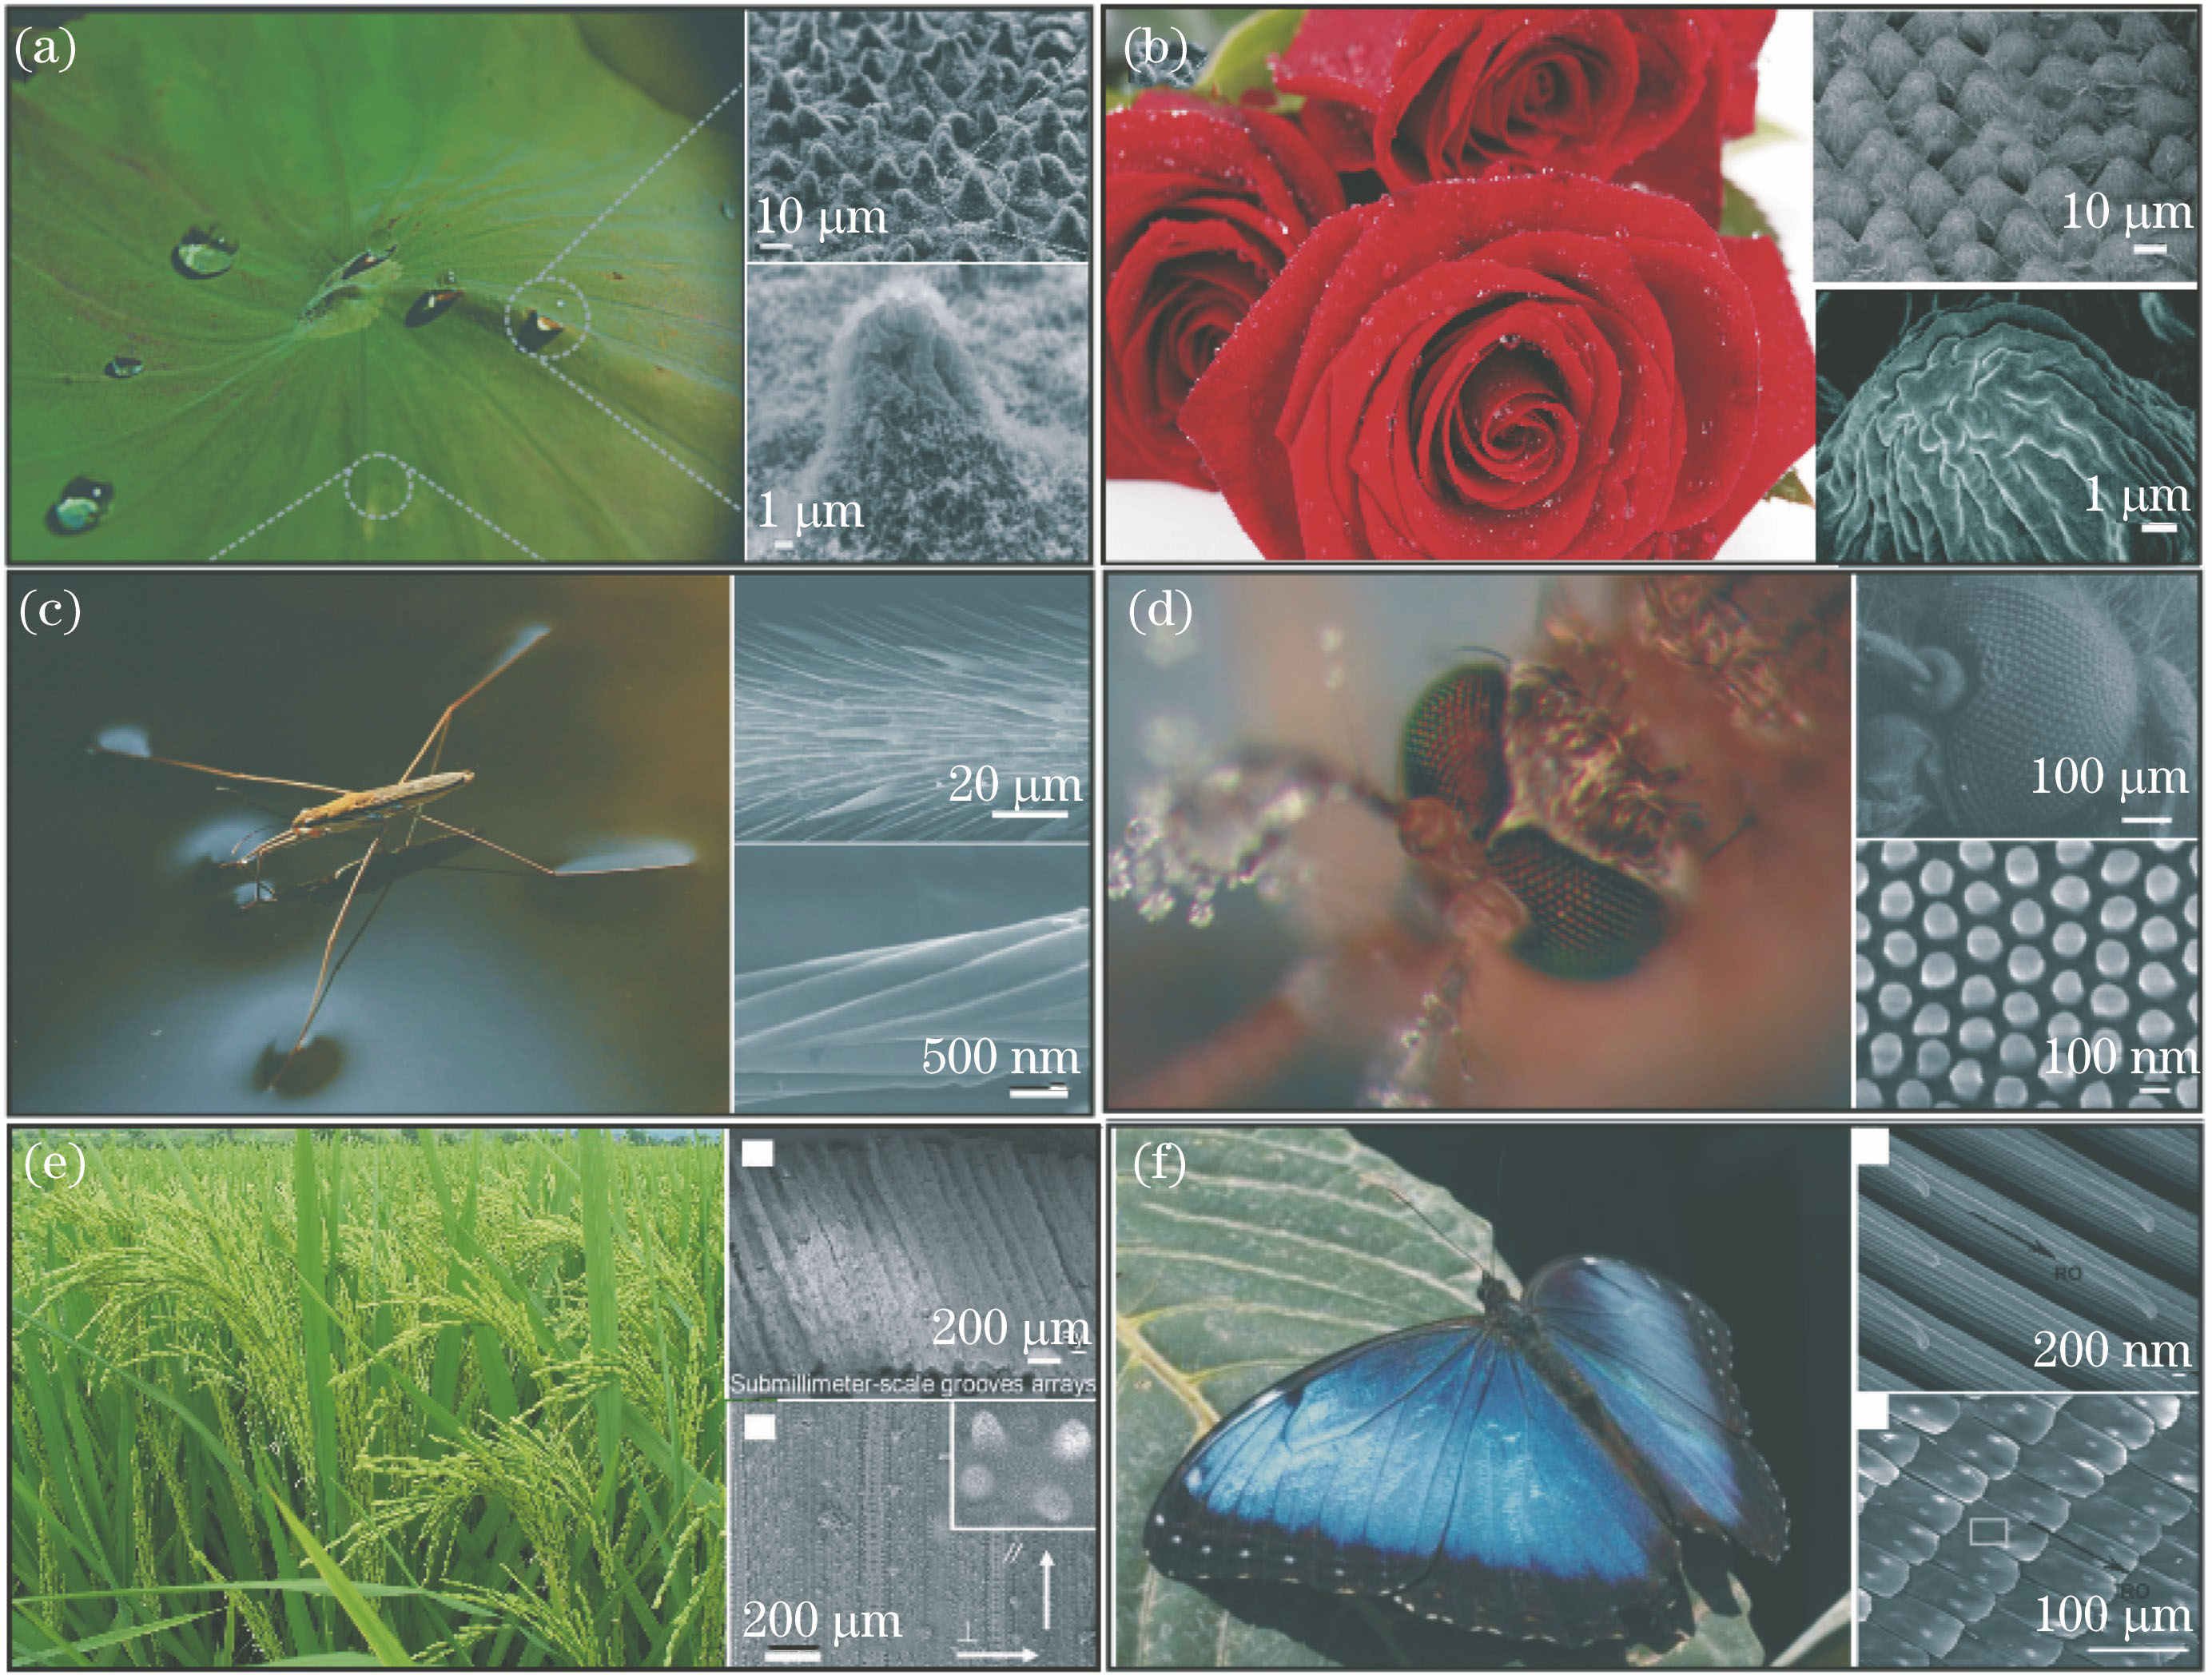 Creatures in nature with superhydrophobic surface microstructures. (a) Lotus leaf[1]; (b) rose petal[3]; (c) leg of water strider[4]; (d) mosquito eye[6]; (e) rice leaf[7]; (f) butterfly wing[8]